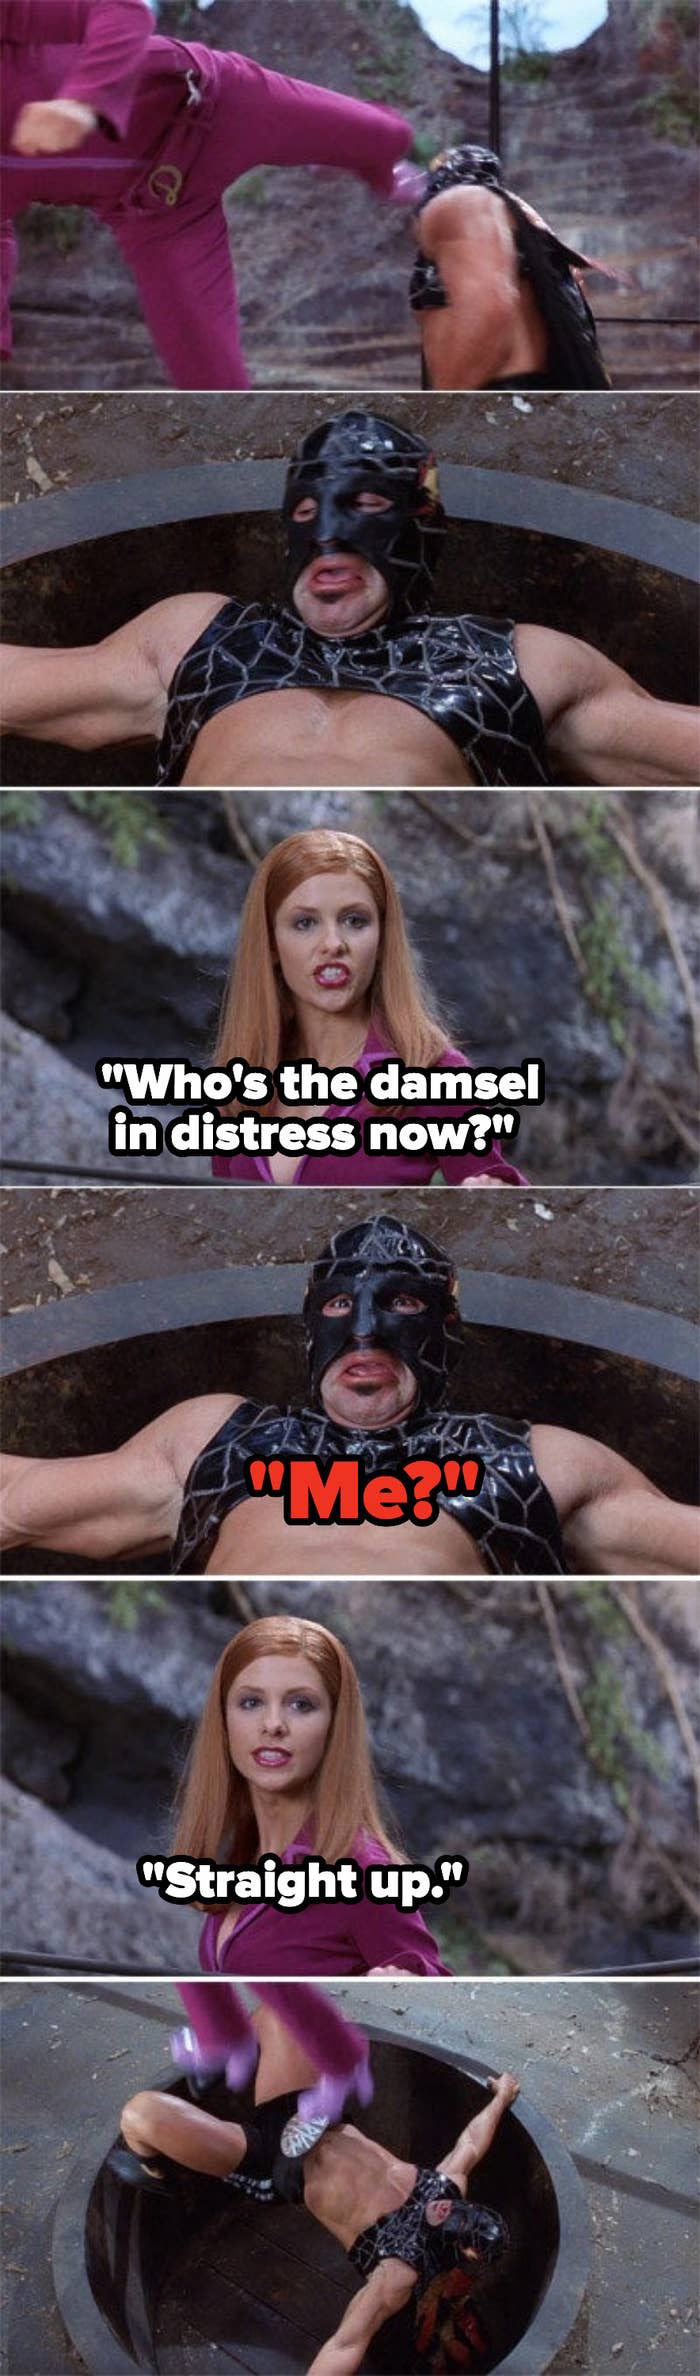 Daphne saying, "Who's the damsel in distress now?"